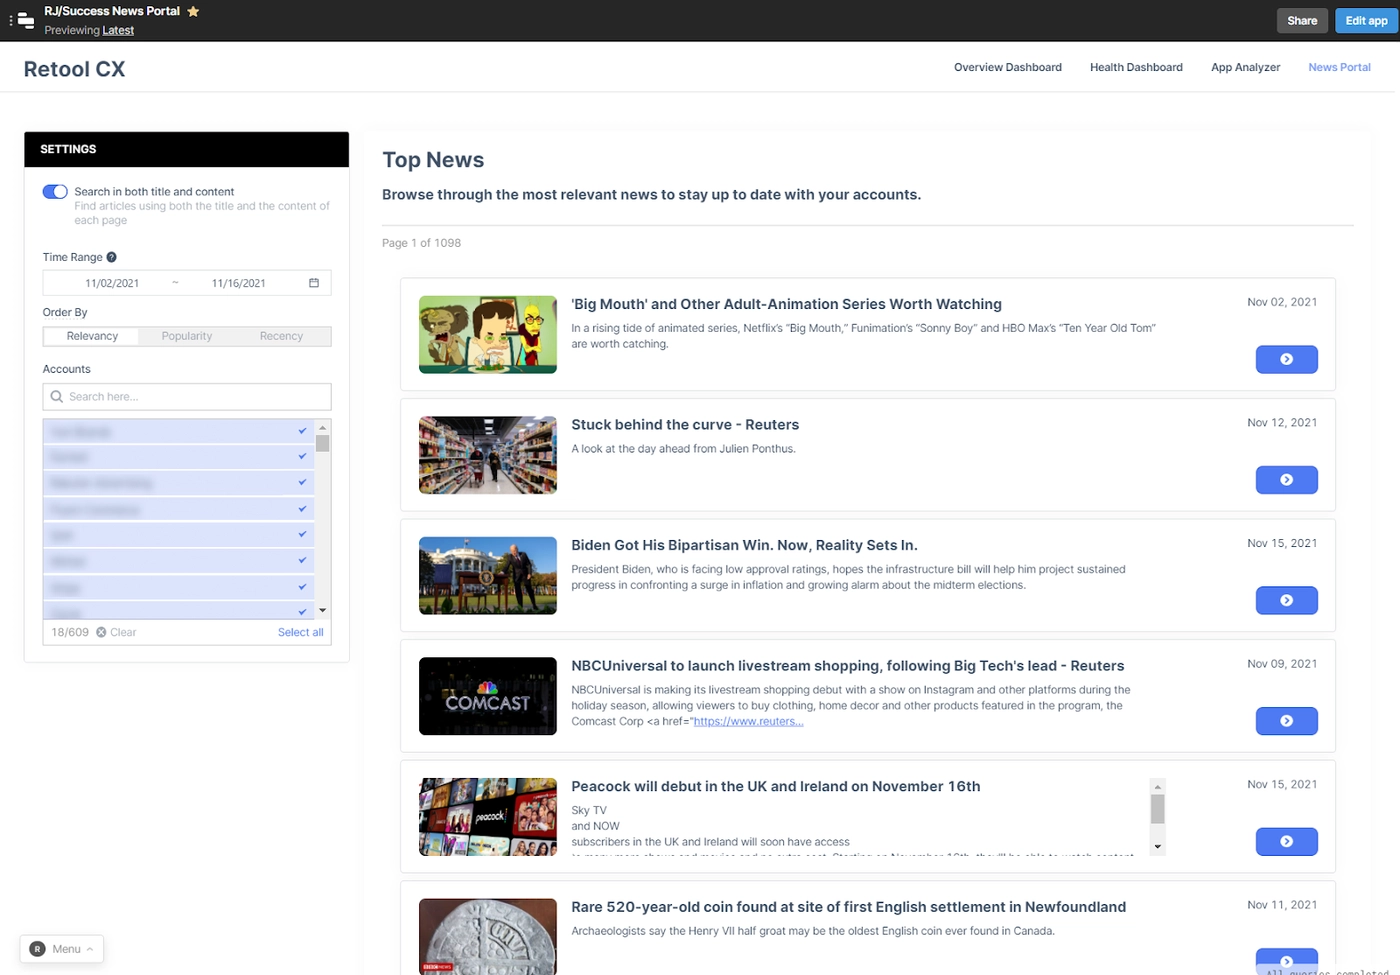 The dashboard includes a News Portal to see relevant news articles associated with accounts.